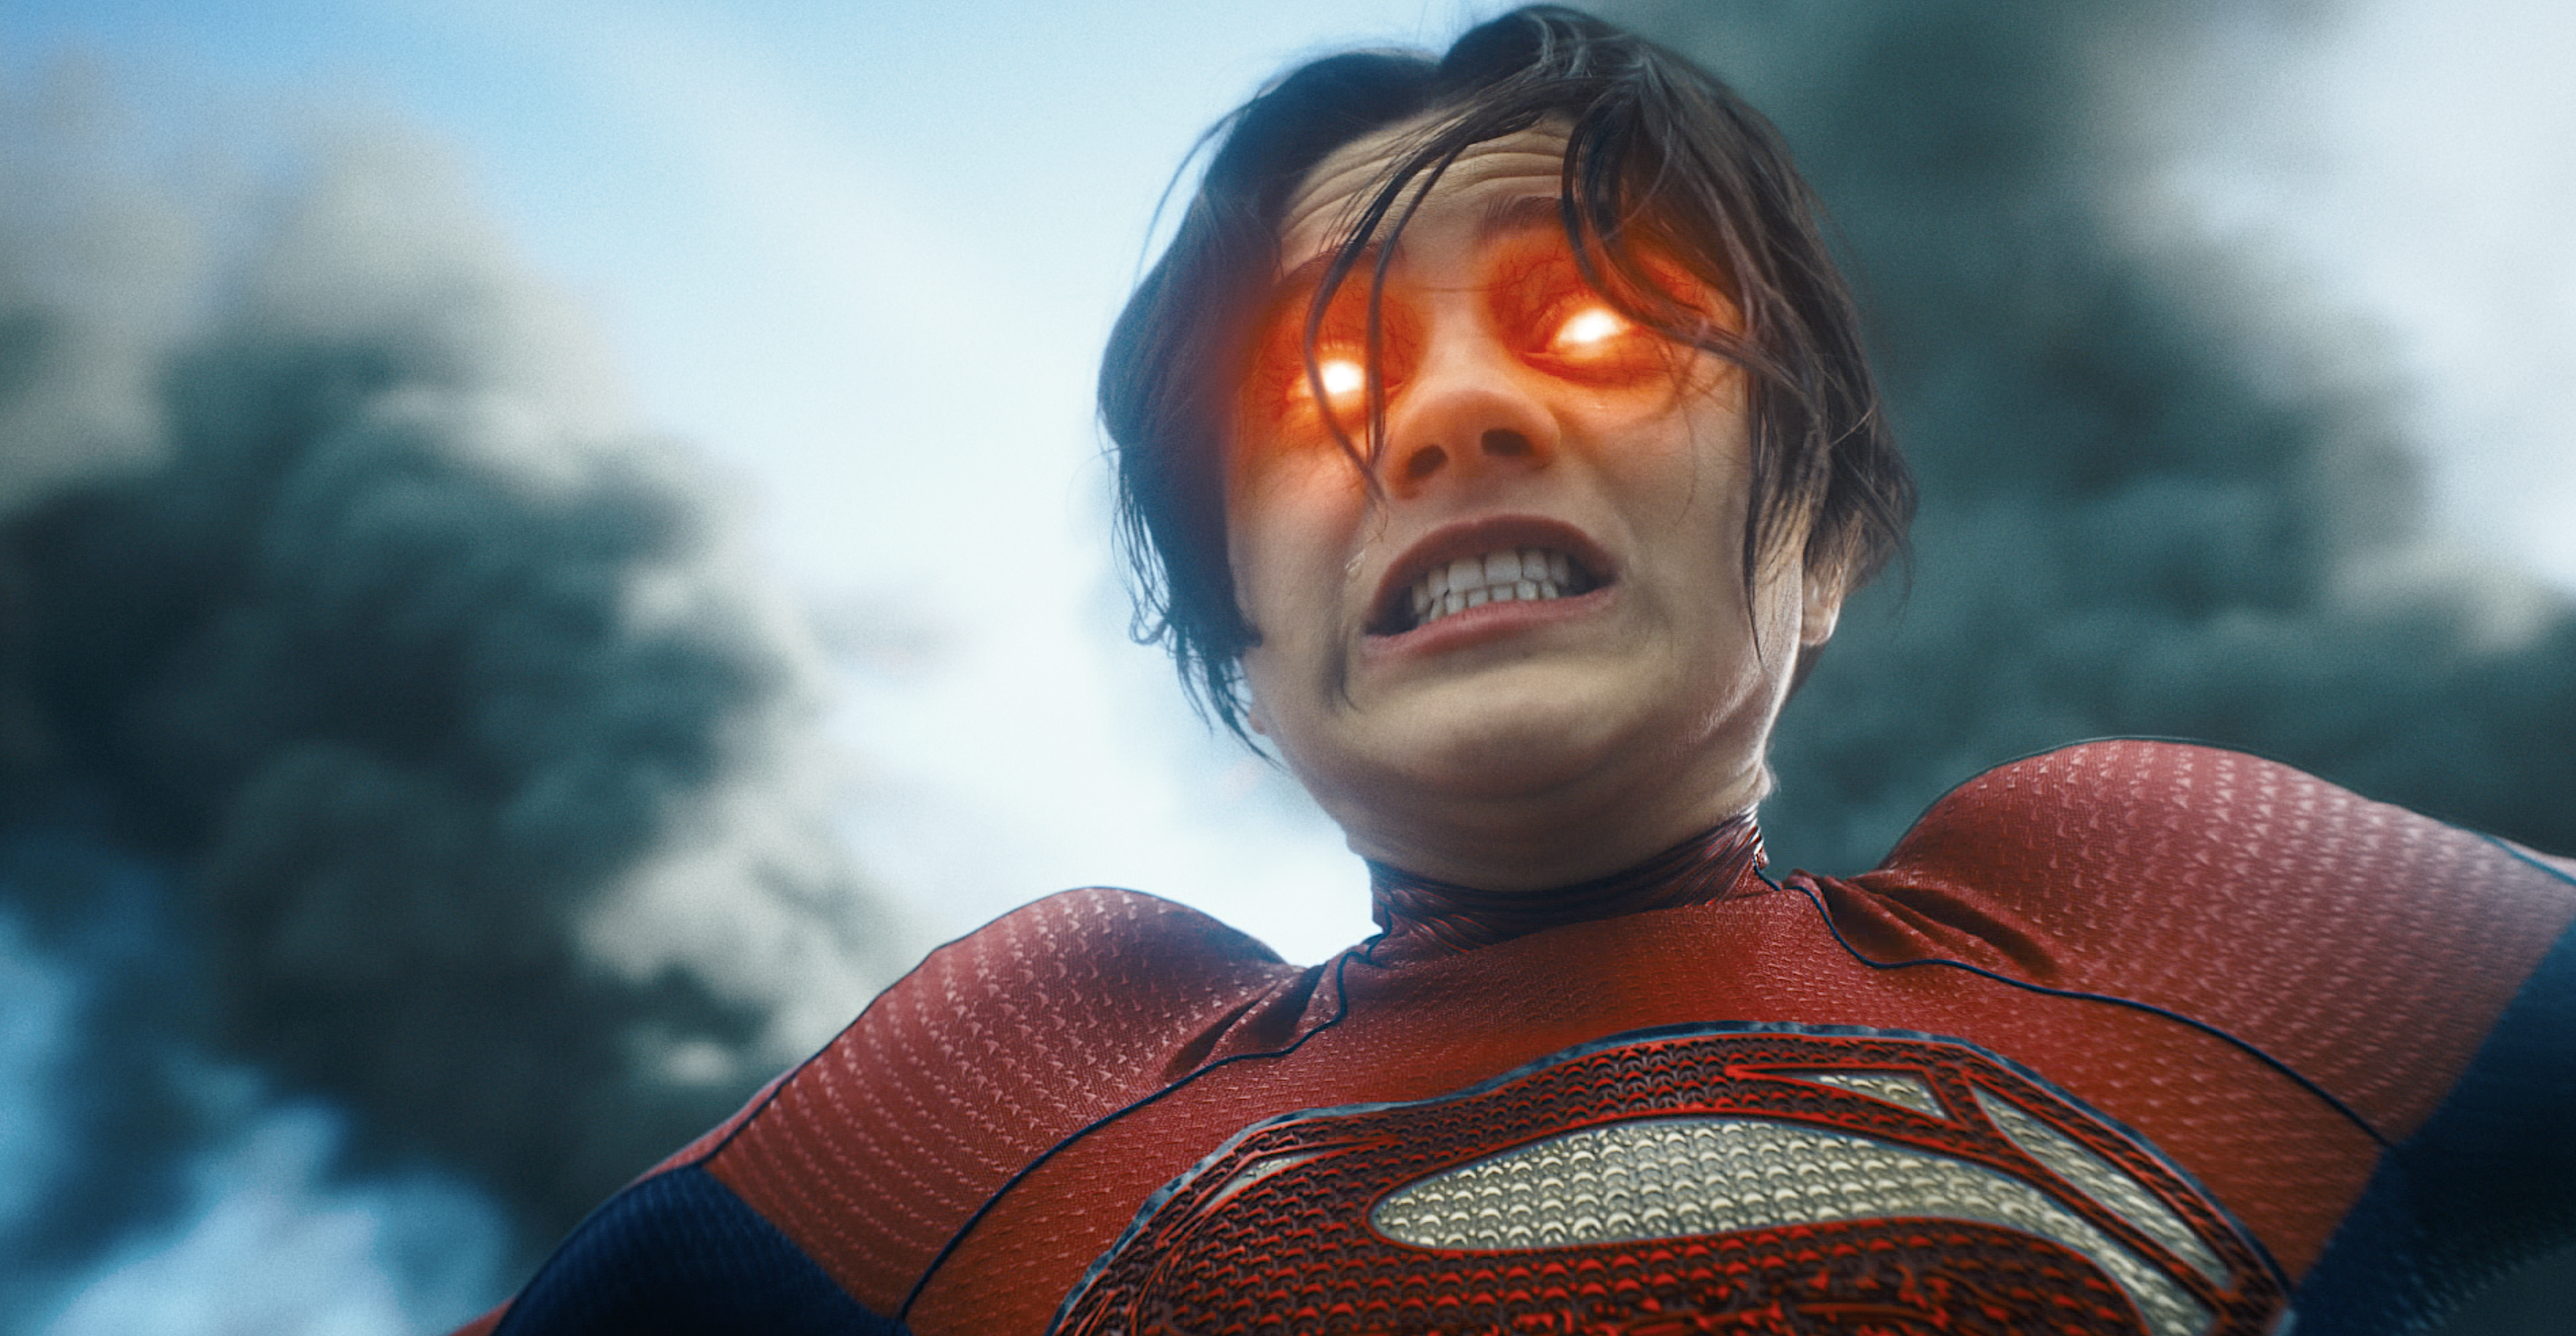 Sasha Calle as Supergirl in the 2023 movie The Flash grits and bares her teeth as her eyes light up red and she prepares to shoot heat-vision beams at an attacker